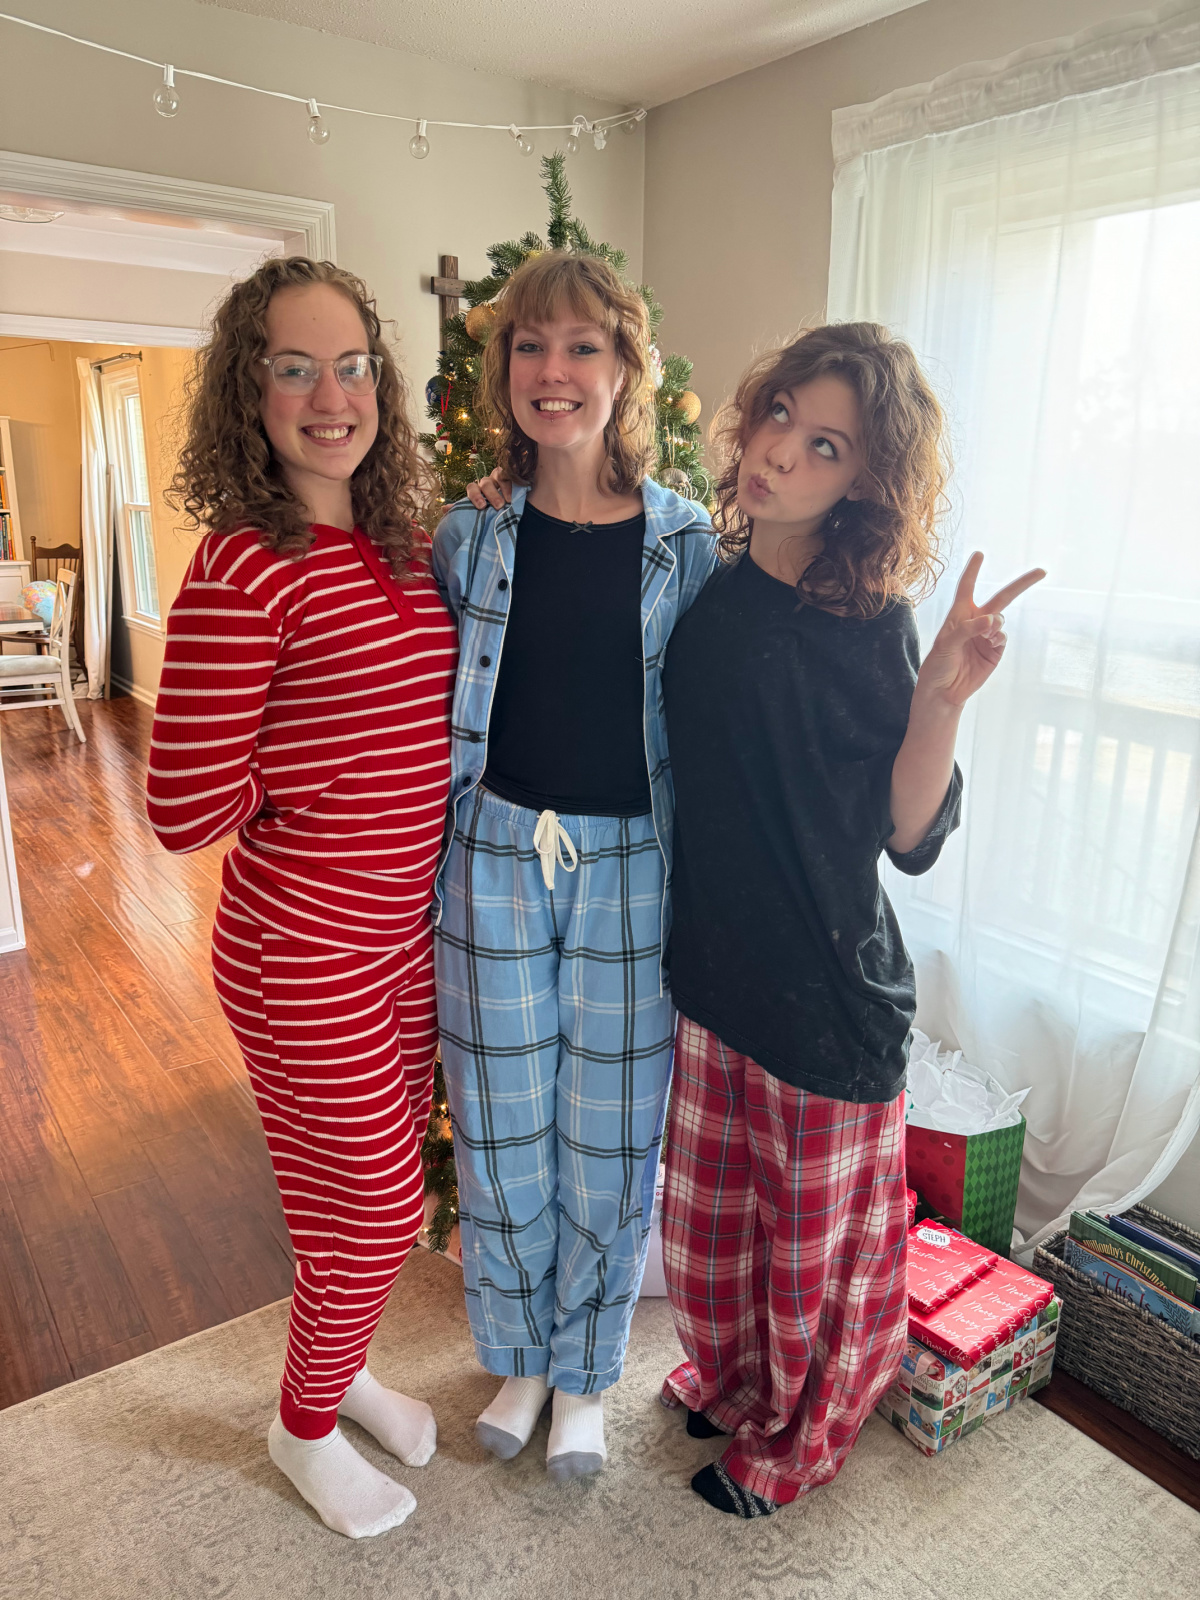 Taviano sisters, Christmas morning picture in front of Christmas tree.